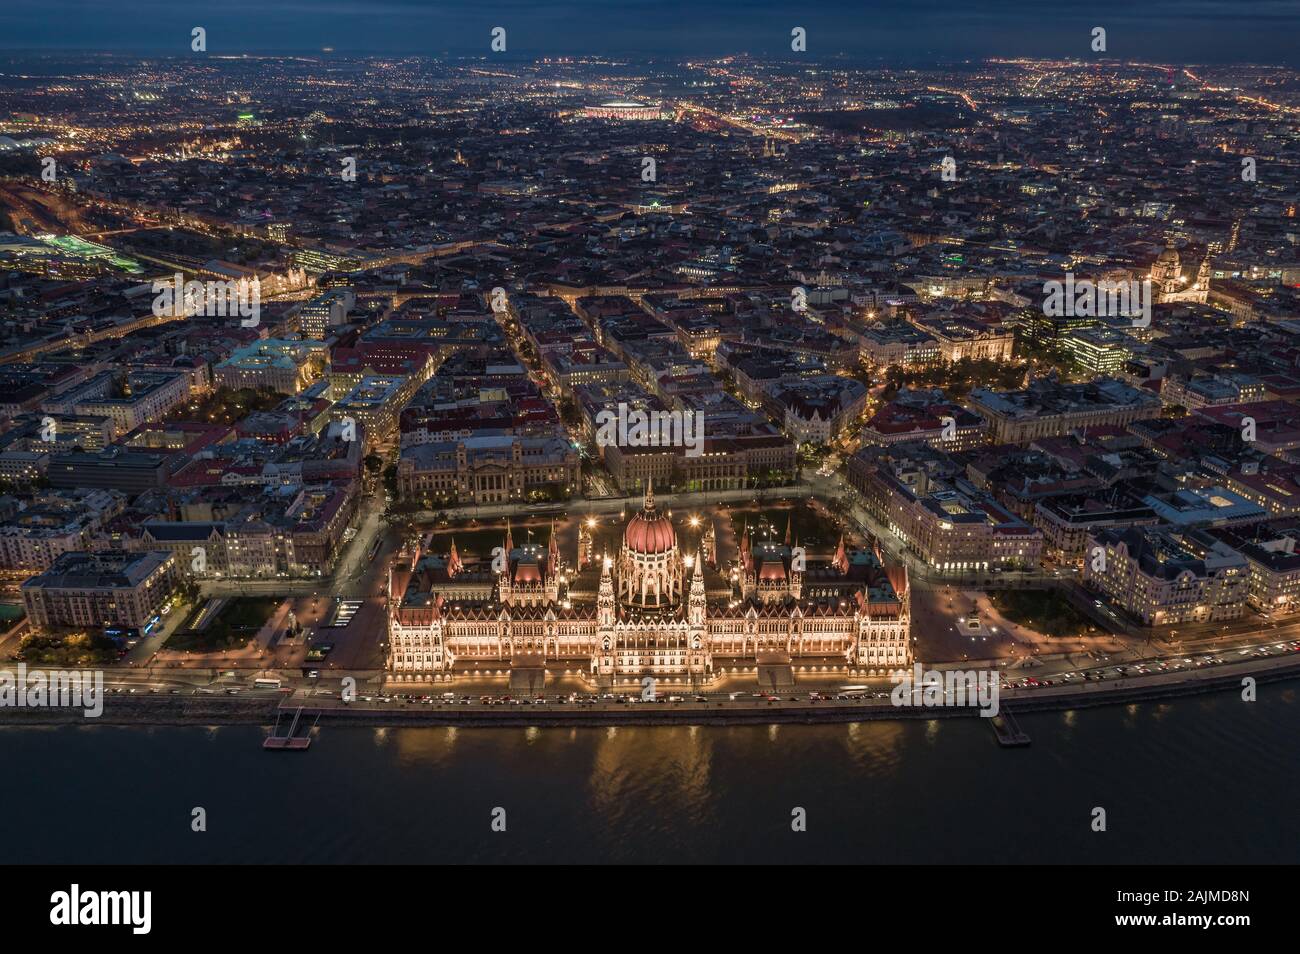 Budapest, Hungary - Aerial skyline view of Budapest by night. This view includes the illuminated Hungarian Parliament building, St. Stephen's Basilica Stock Photo